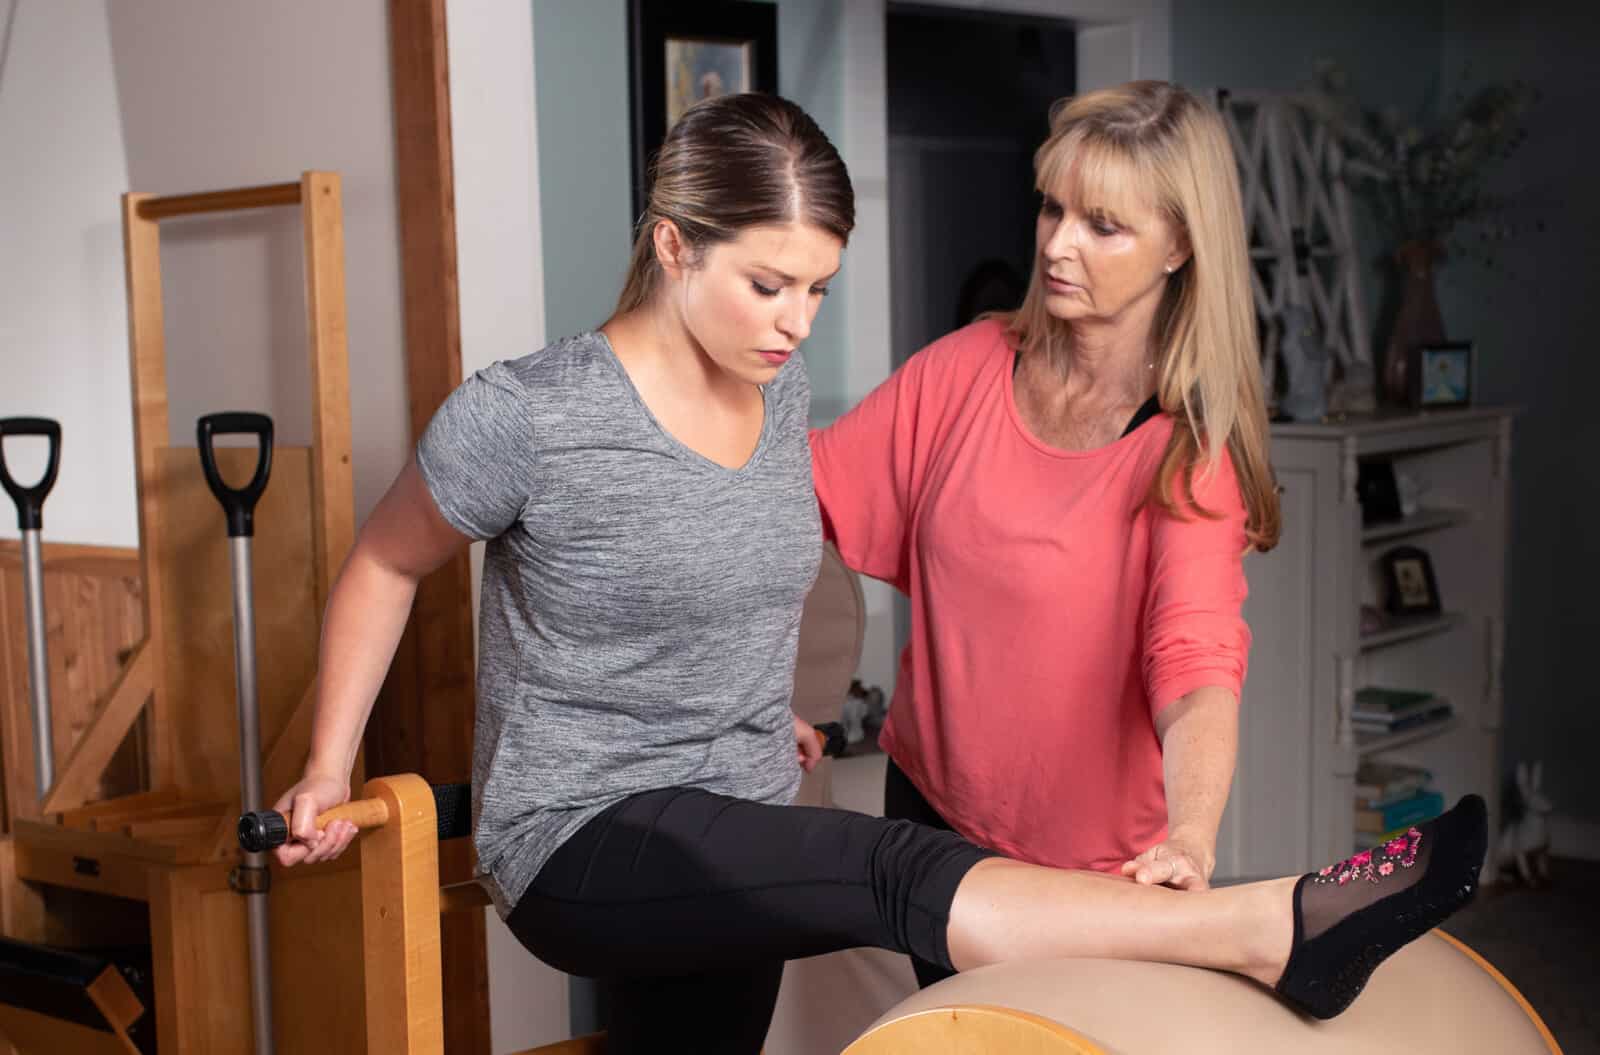 Pilates teacher with bright coral shirt helps student stretch her leg over a piece of barrel equipment.